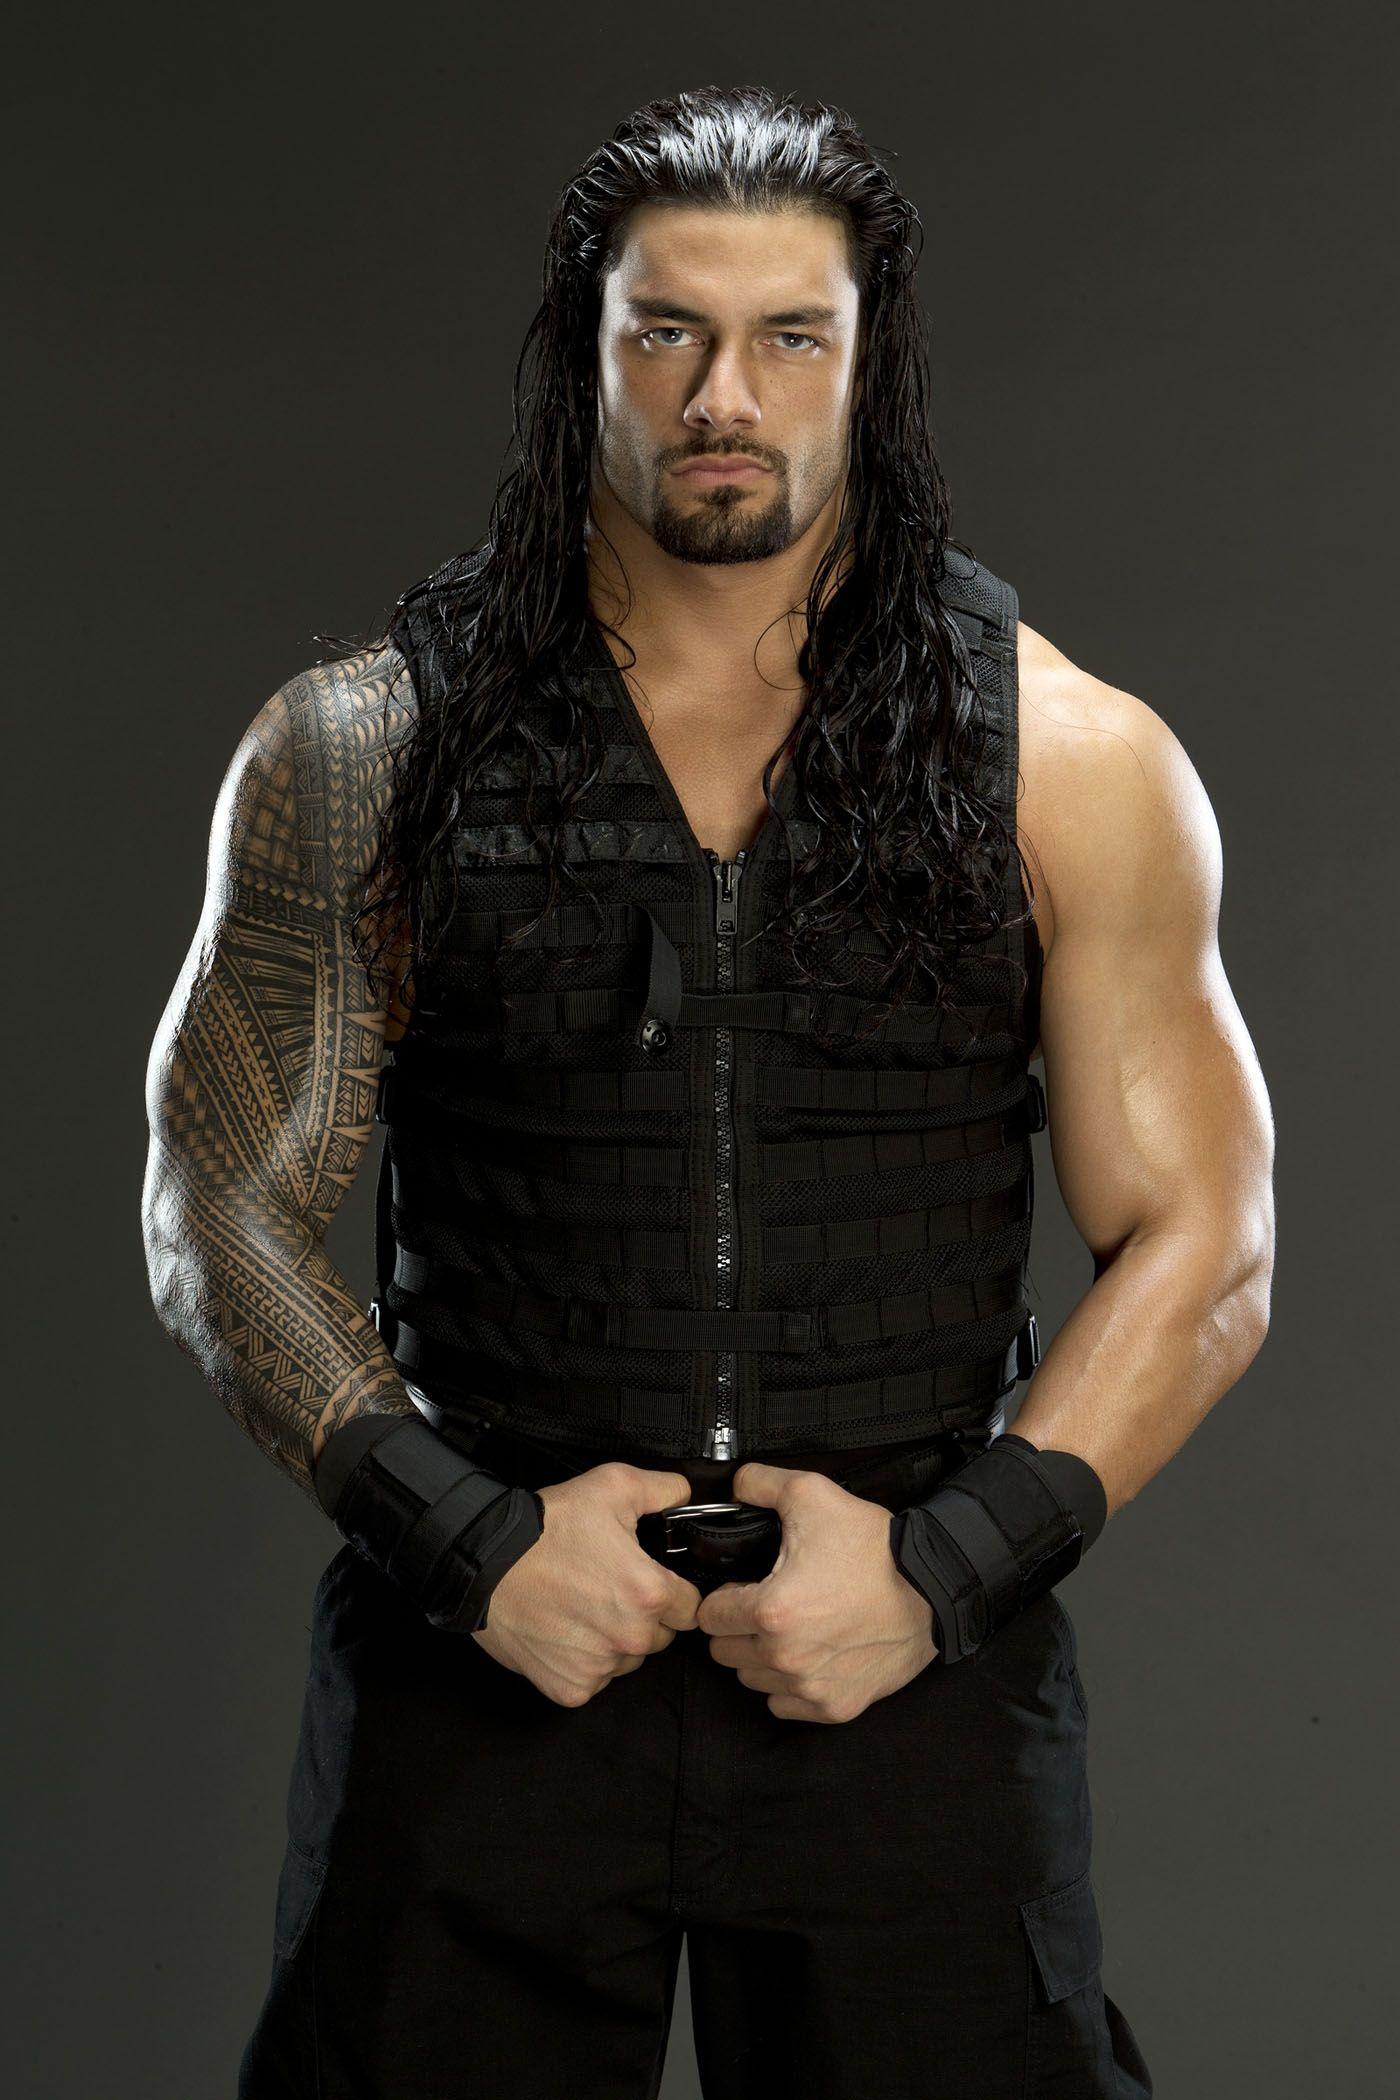 Roman Reigns, known as the powerhouse of the dominant trio “The